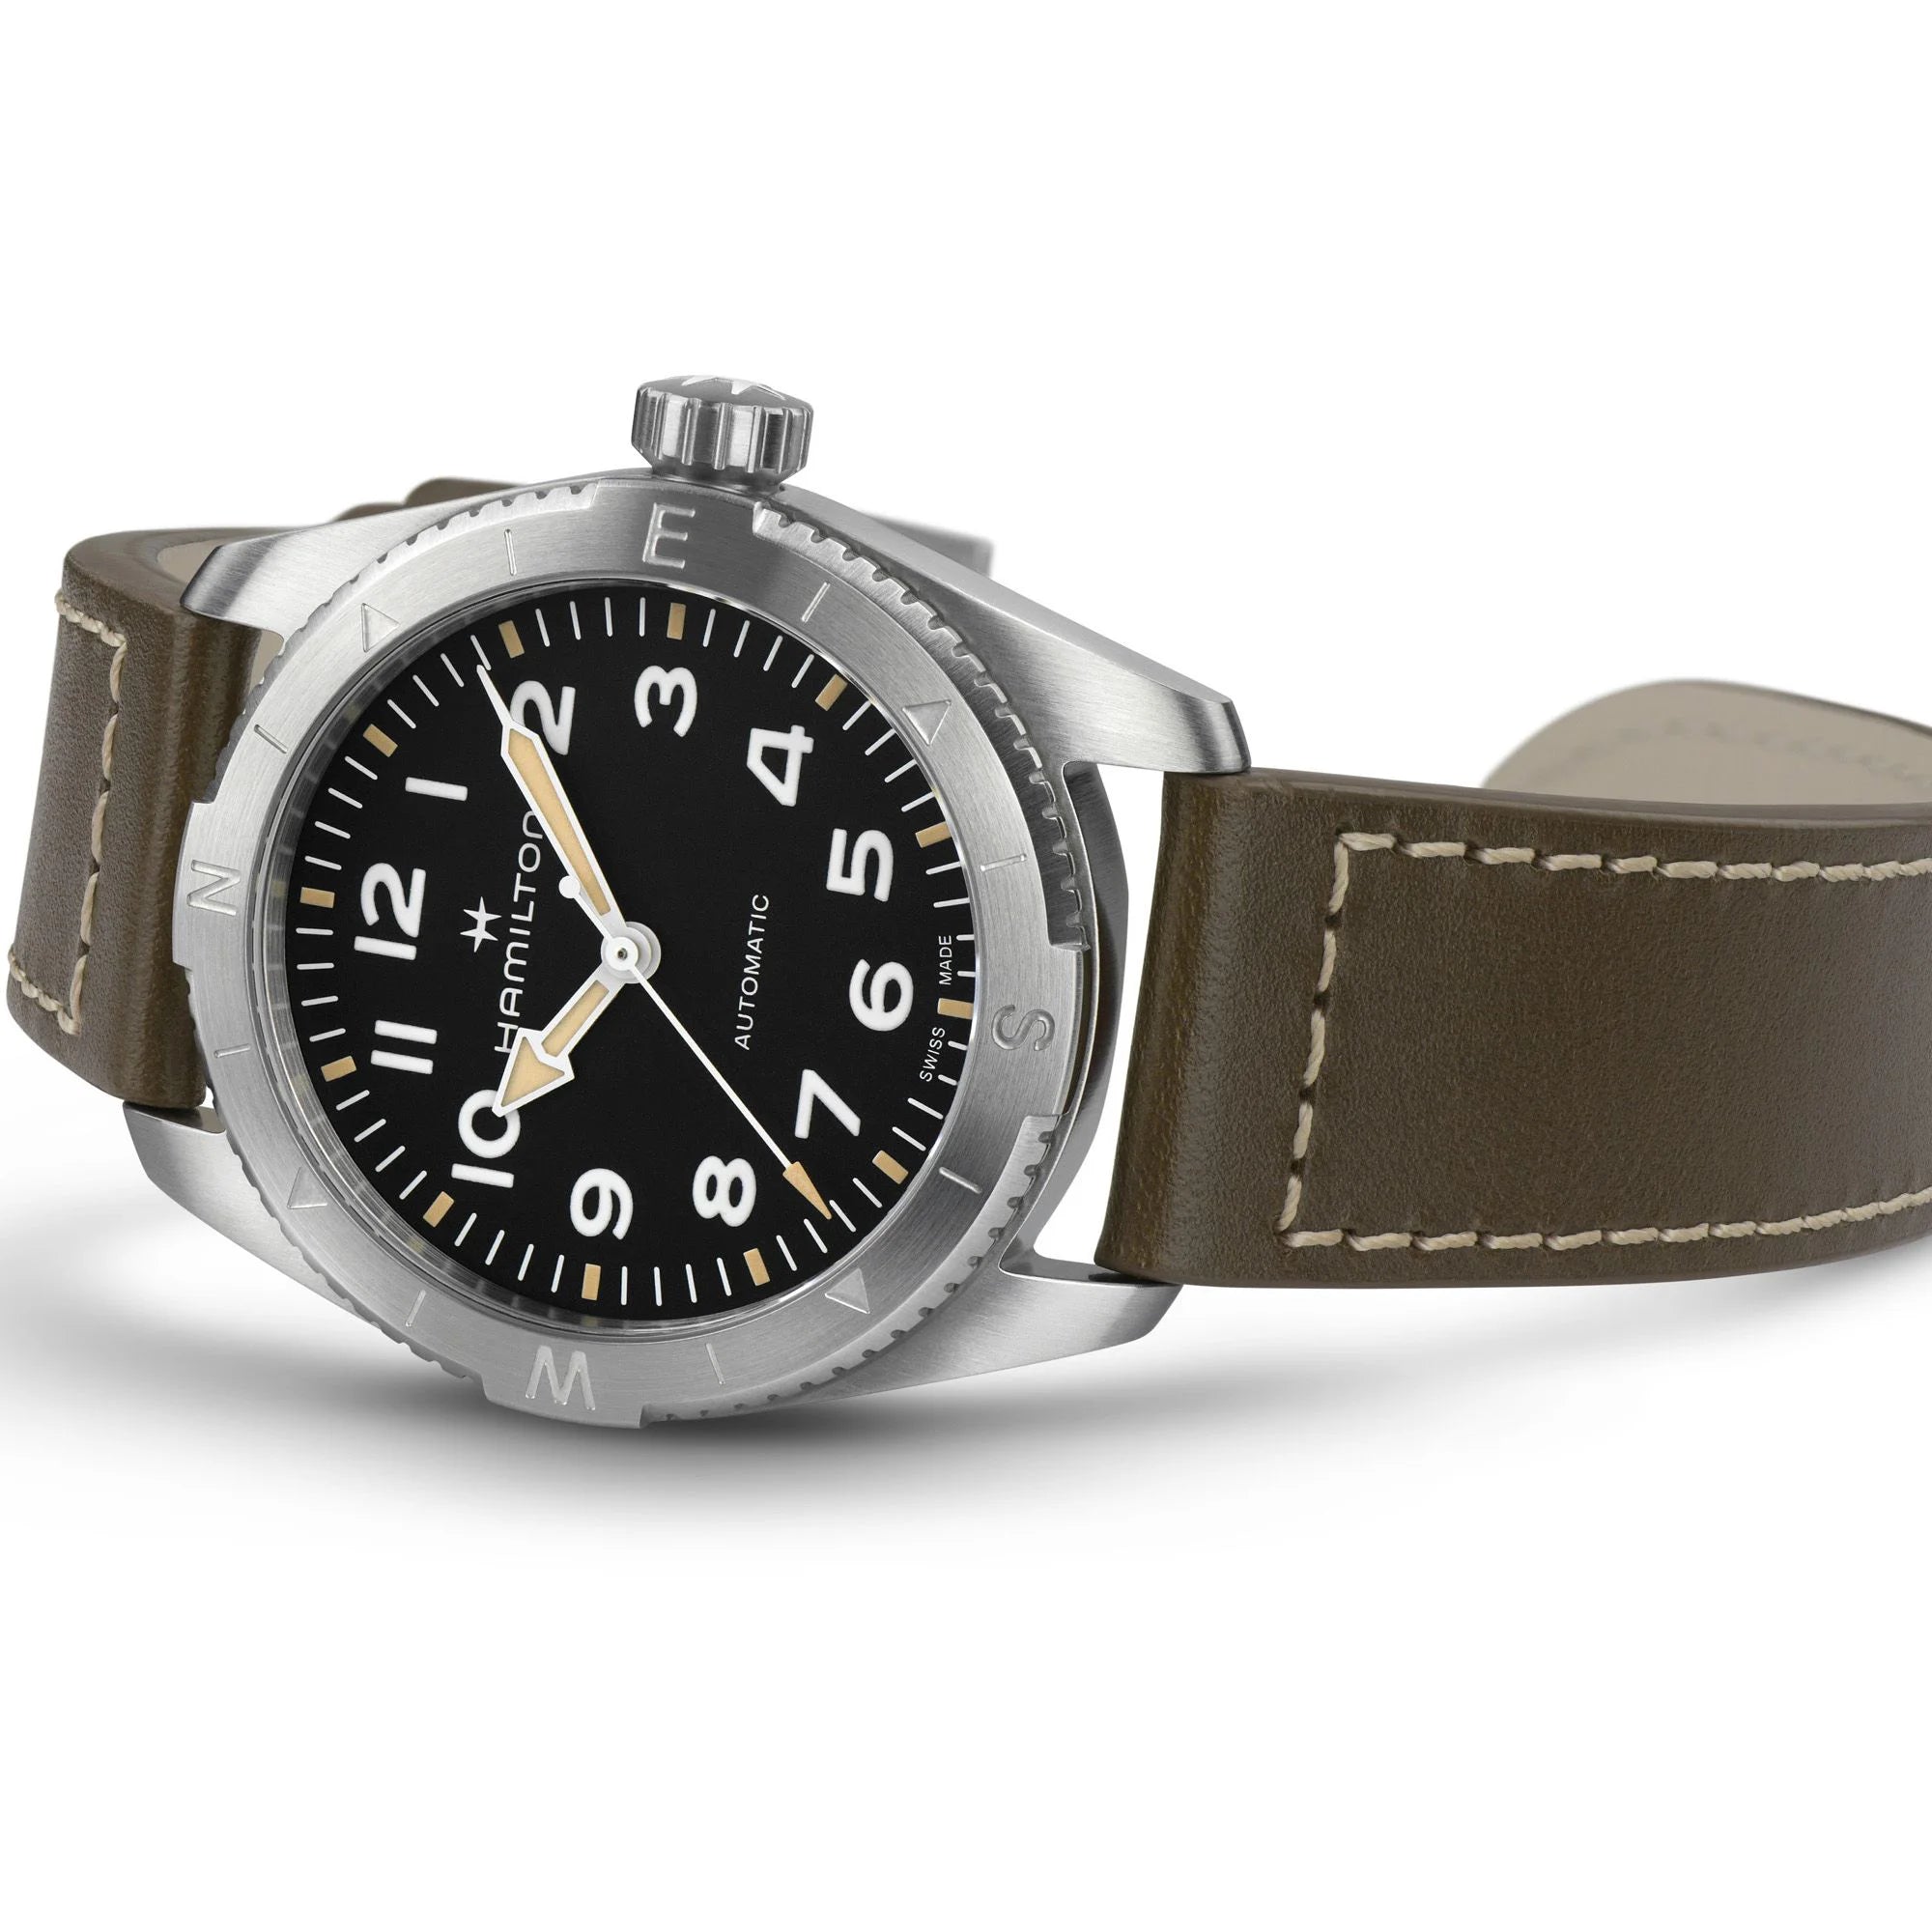 Khaki Field Expedition Auto - 37mm - H70225830